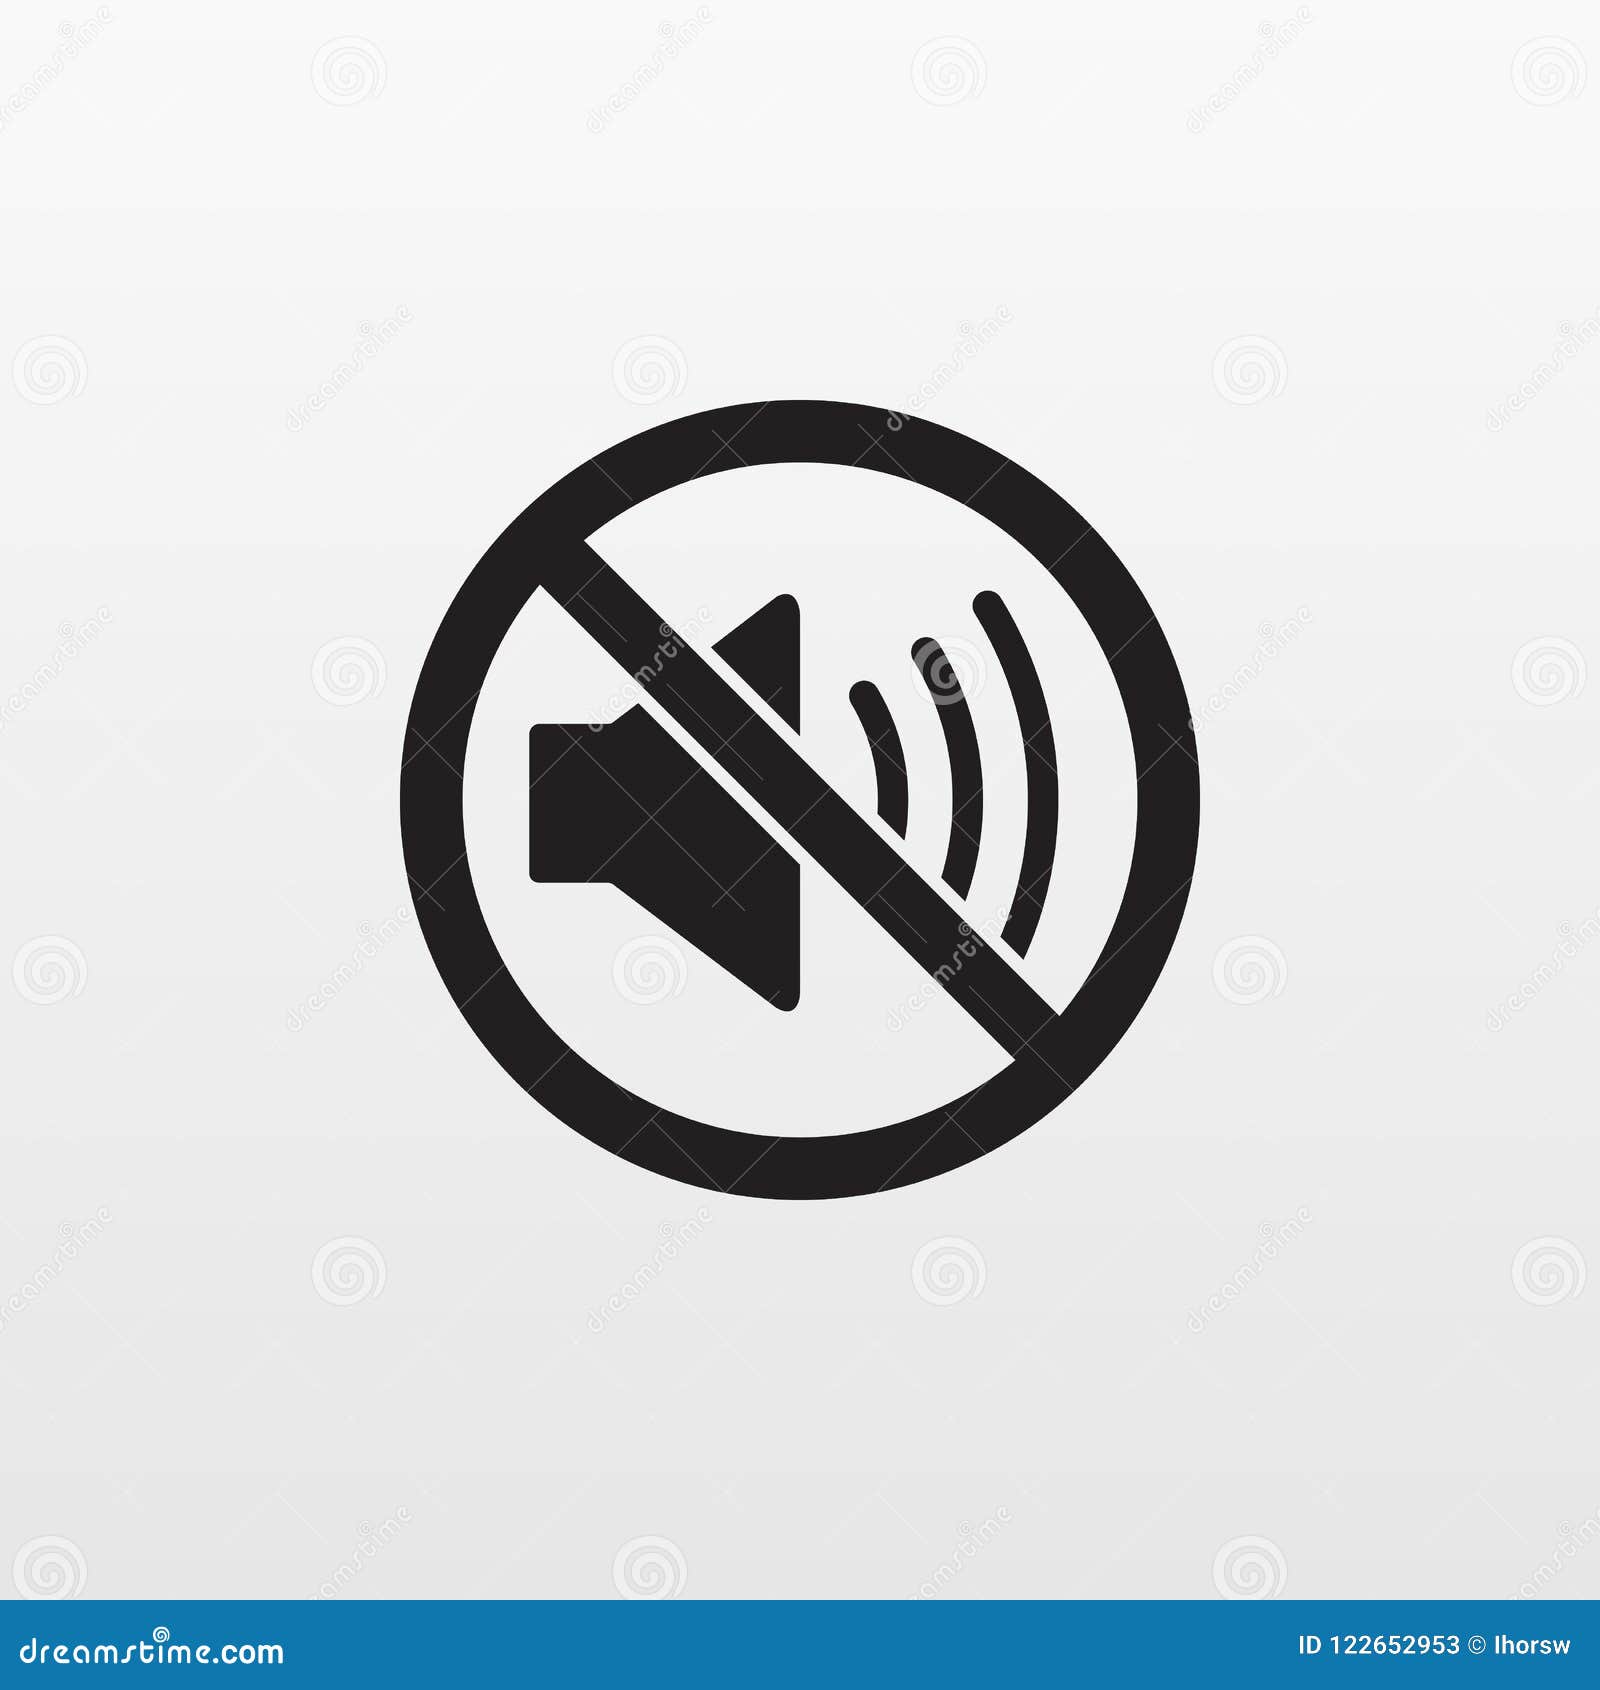 silent mode icon . not sound , quiet sign. modern simple flat sign. business, internet